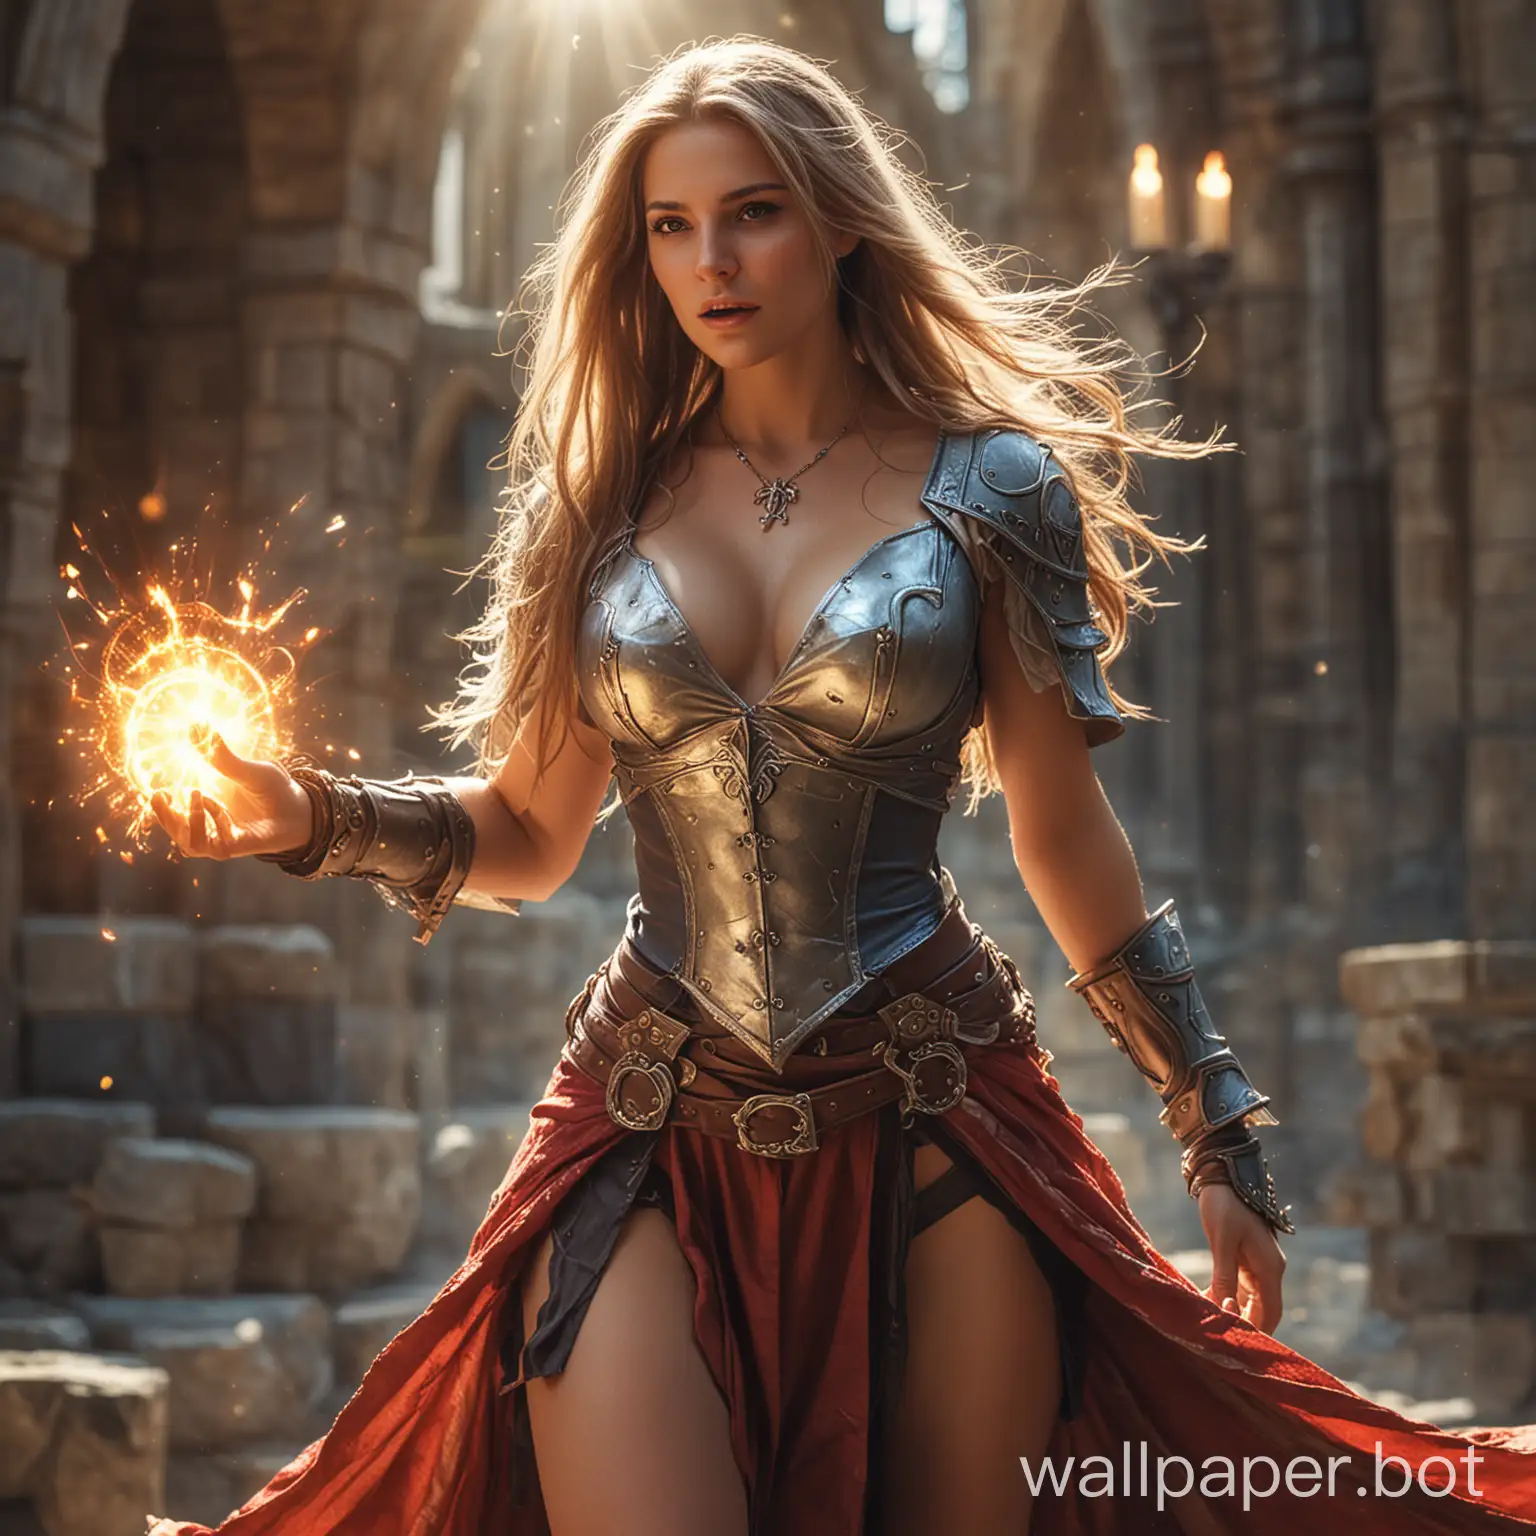 female battlemage with large chest. wearing a skimpy dress and a skimpy skirt. long hair. casts magic. lens flare. hdr.